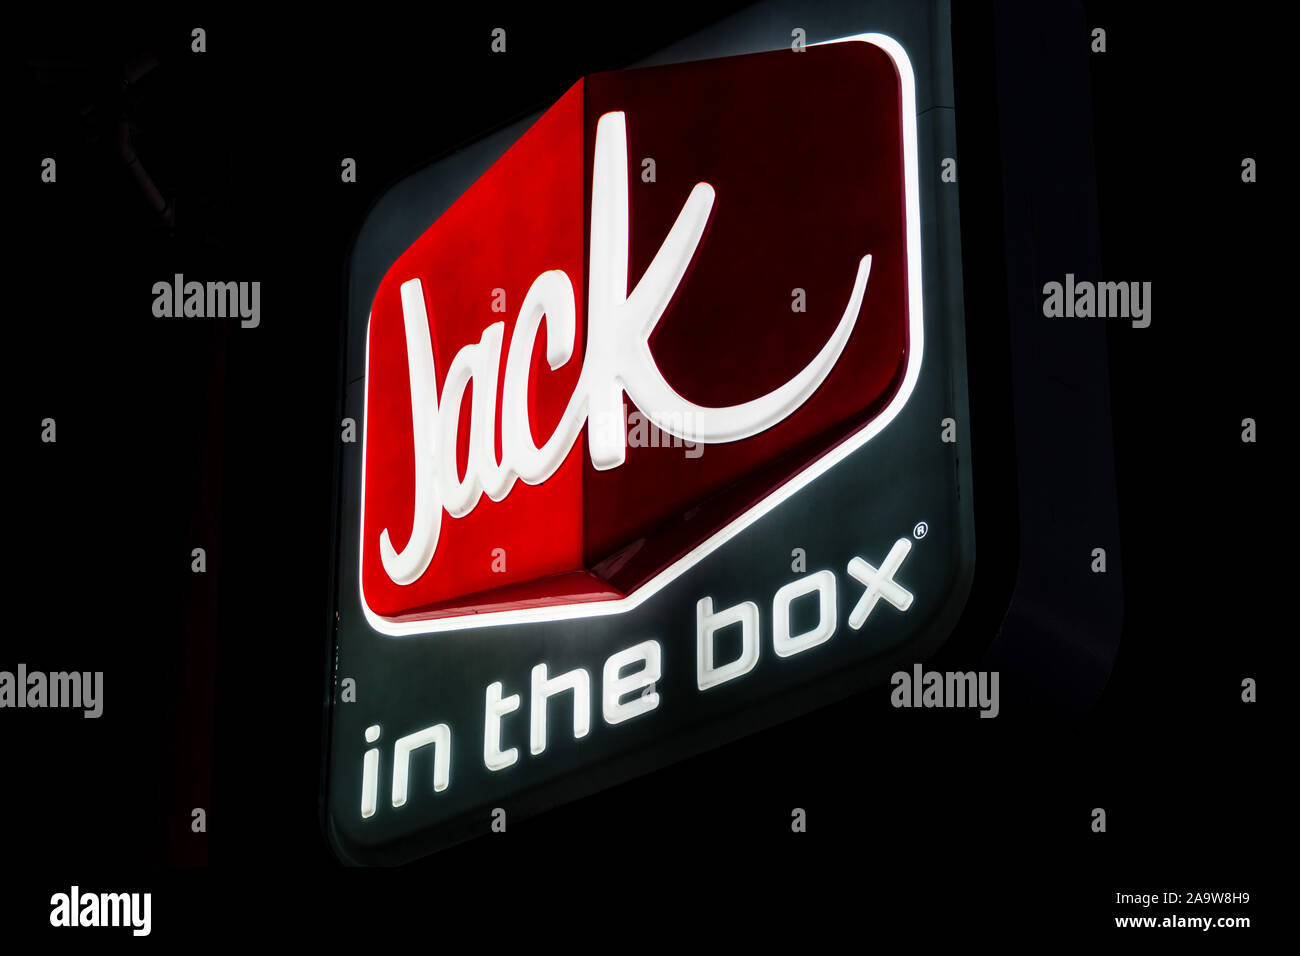 Oct 20, 2019 Redwood City / CA / USA - Night view of Jack in the box sign at one of their locations in South San Francisco bay area Stock Photo